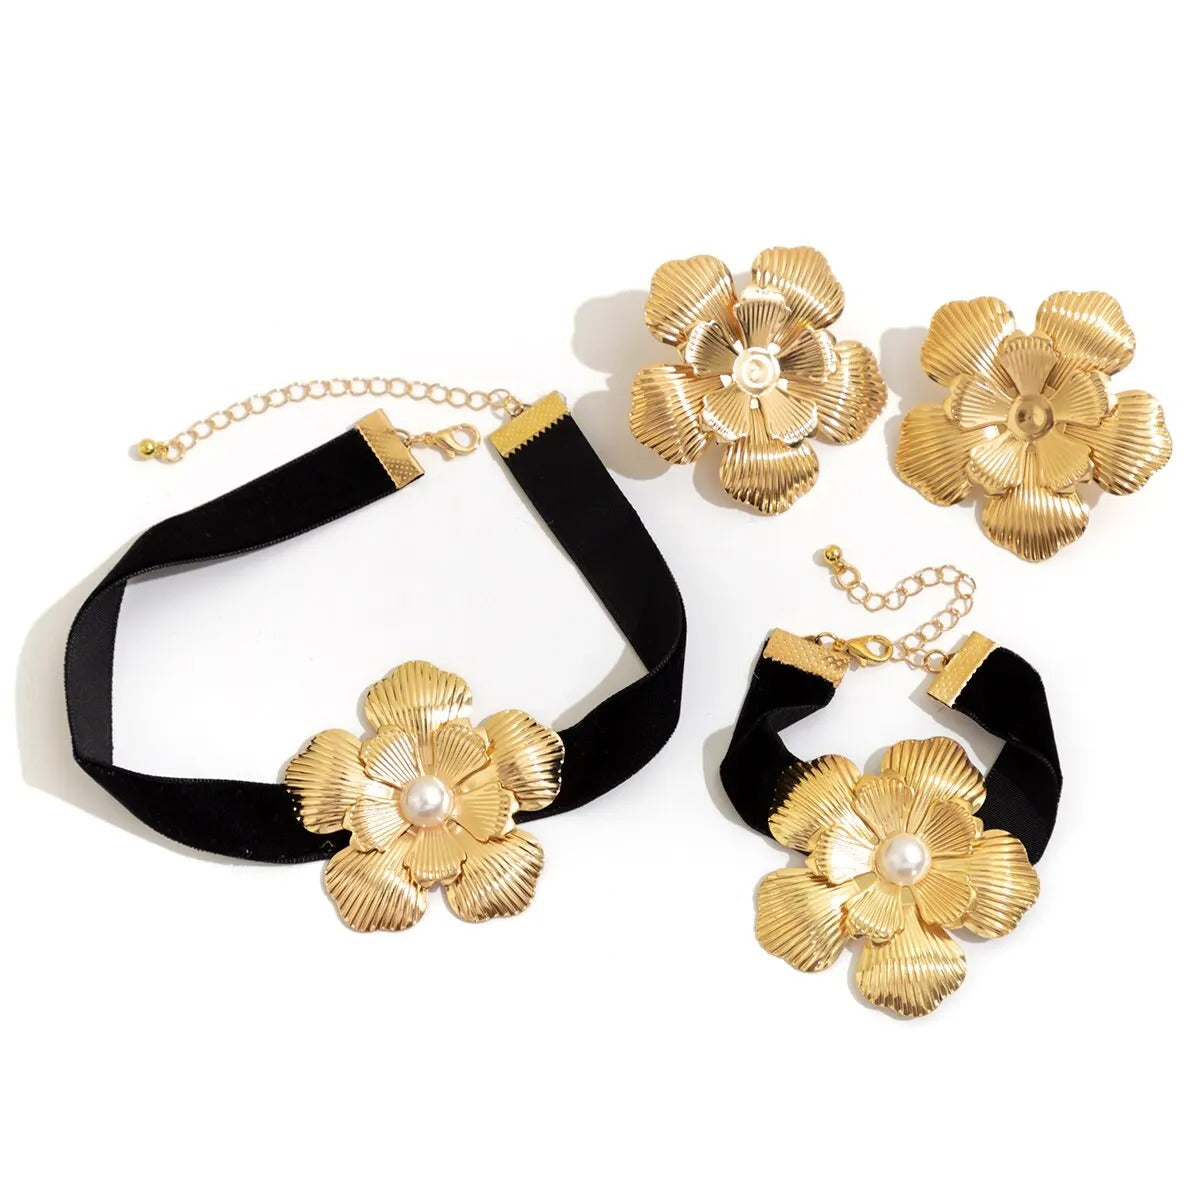 Golden Floral Jewelry Set with Pearl Accents